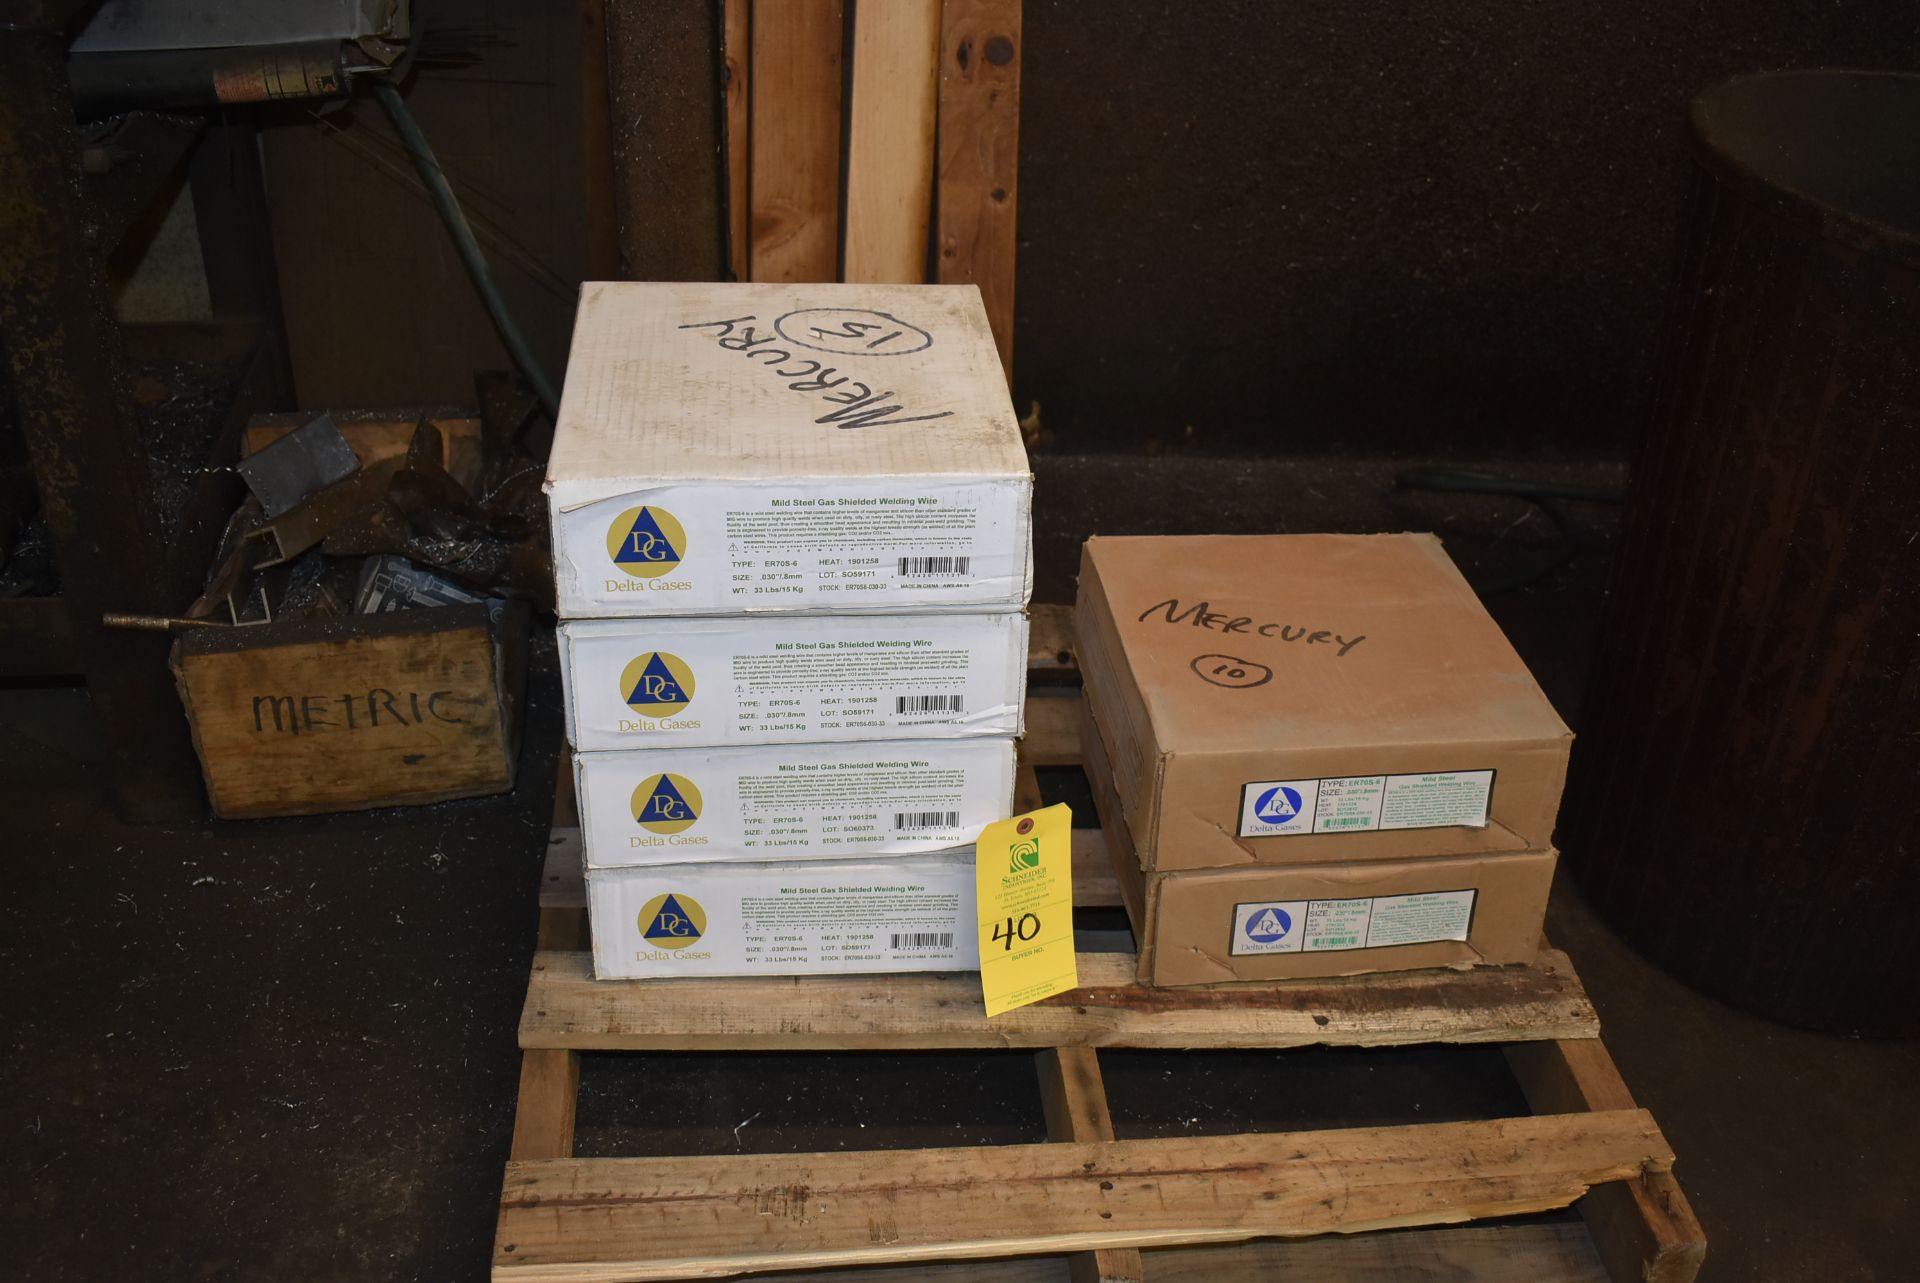 Welding Wire - (4) Boxes Gases Type ER70S-6 Welding Wire, (2) Delta Gases Type ER70S-6 Welding Wire